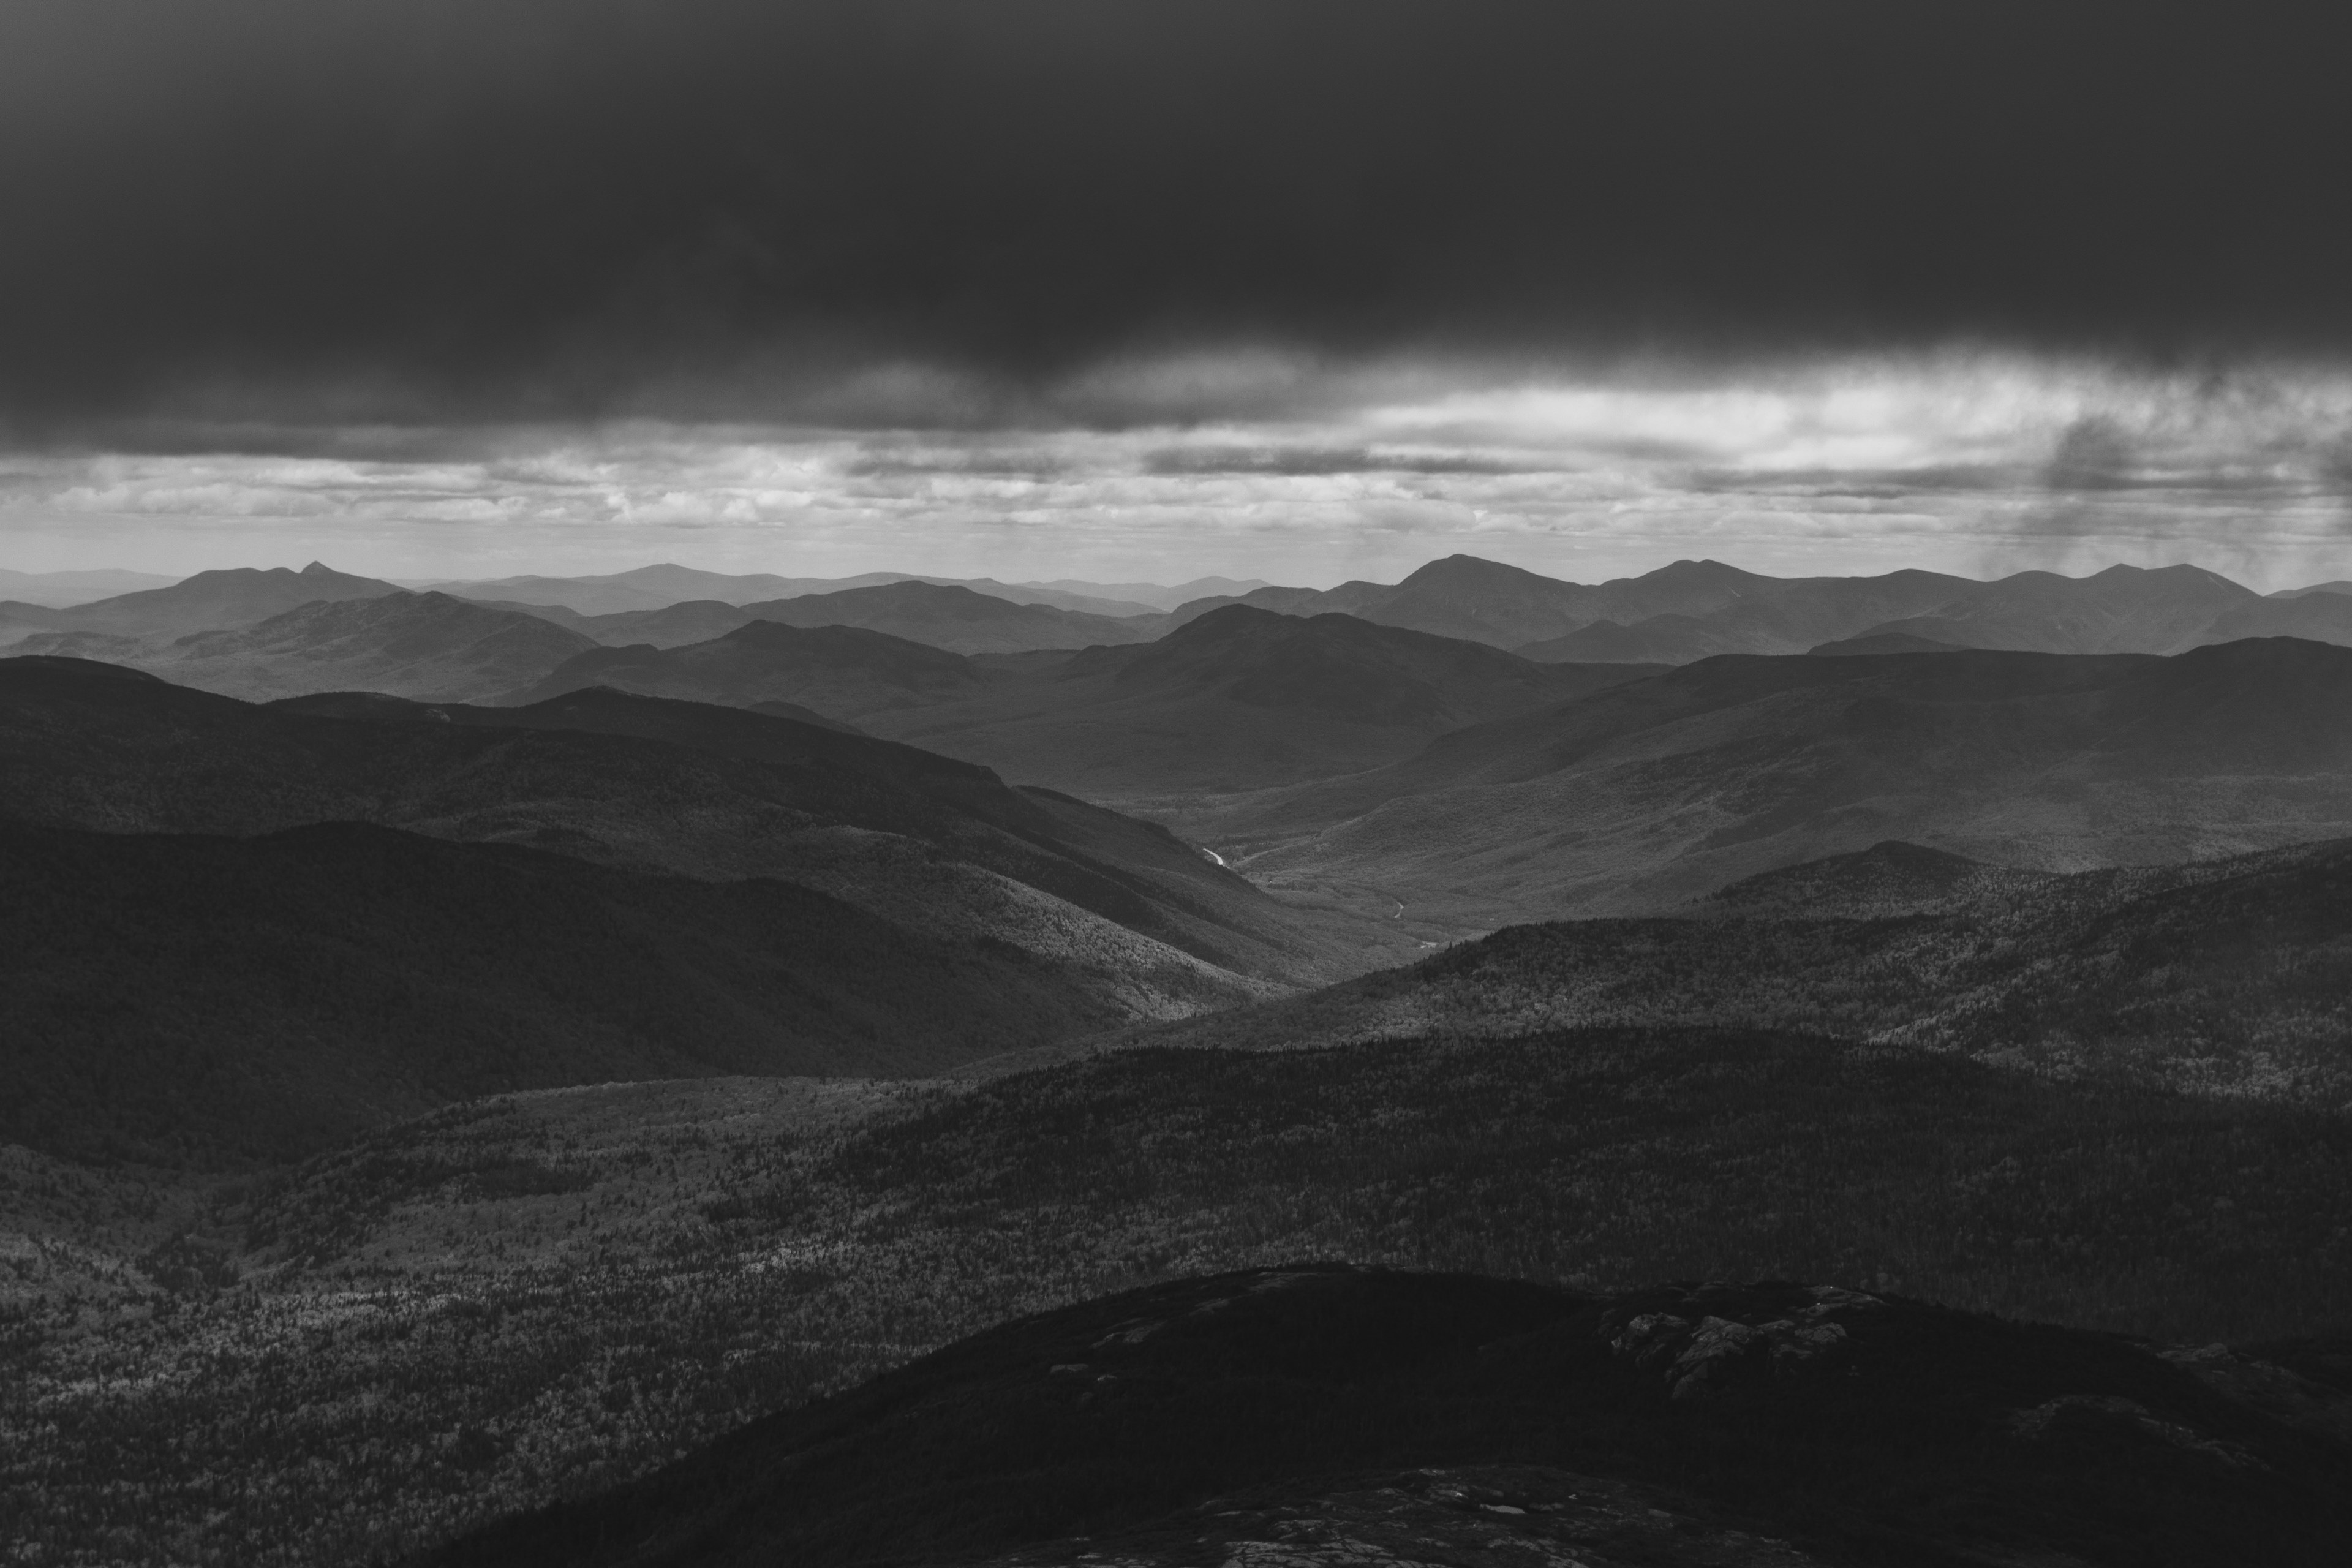 Wallpaper / an desaturated shot of a hilly landscape under thick clouds, ominous highlands 4k wallpaper